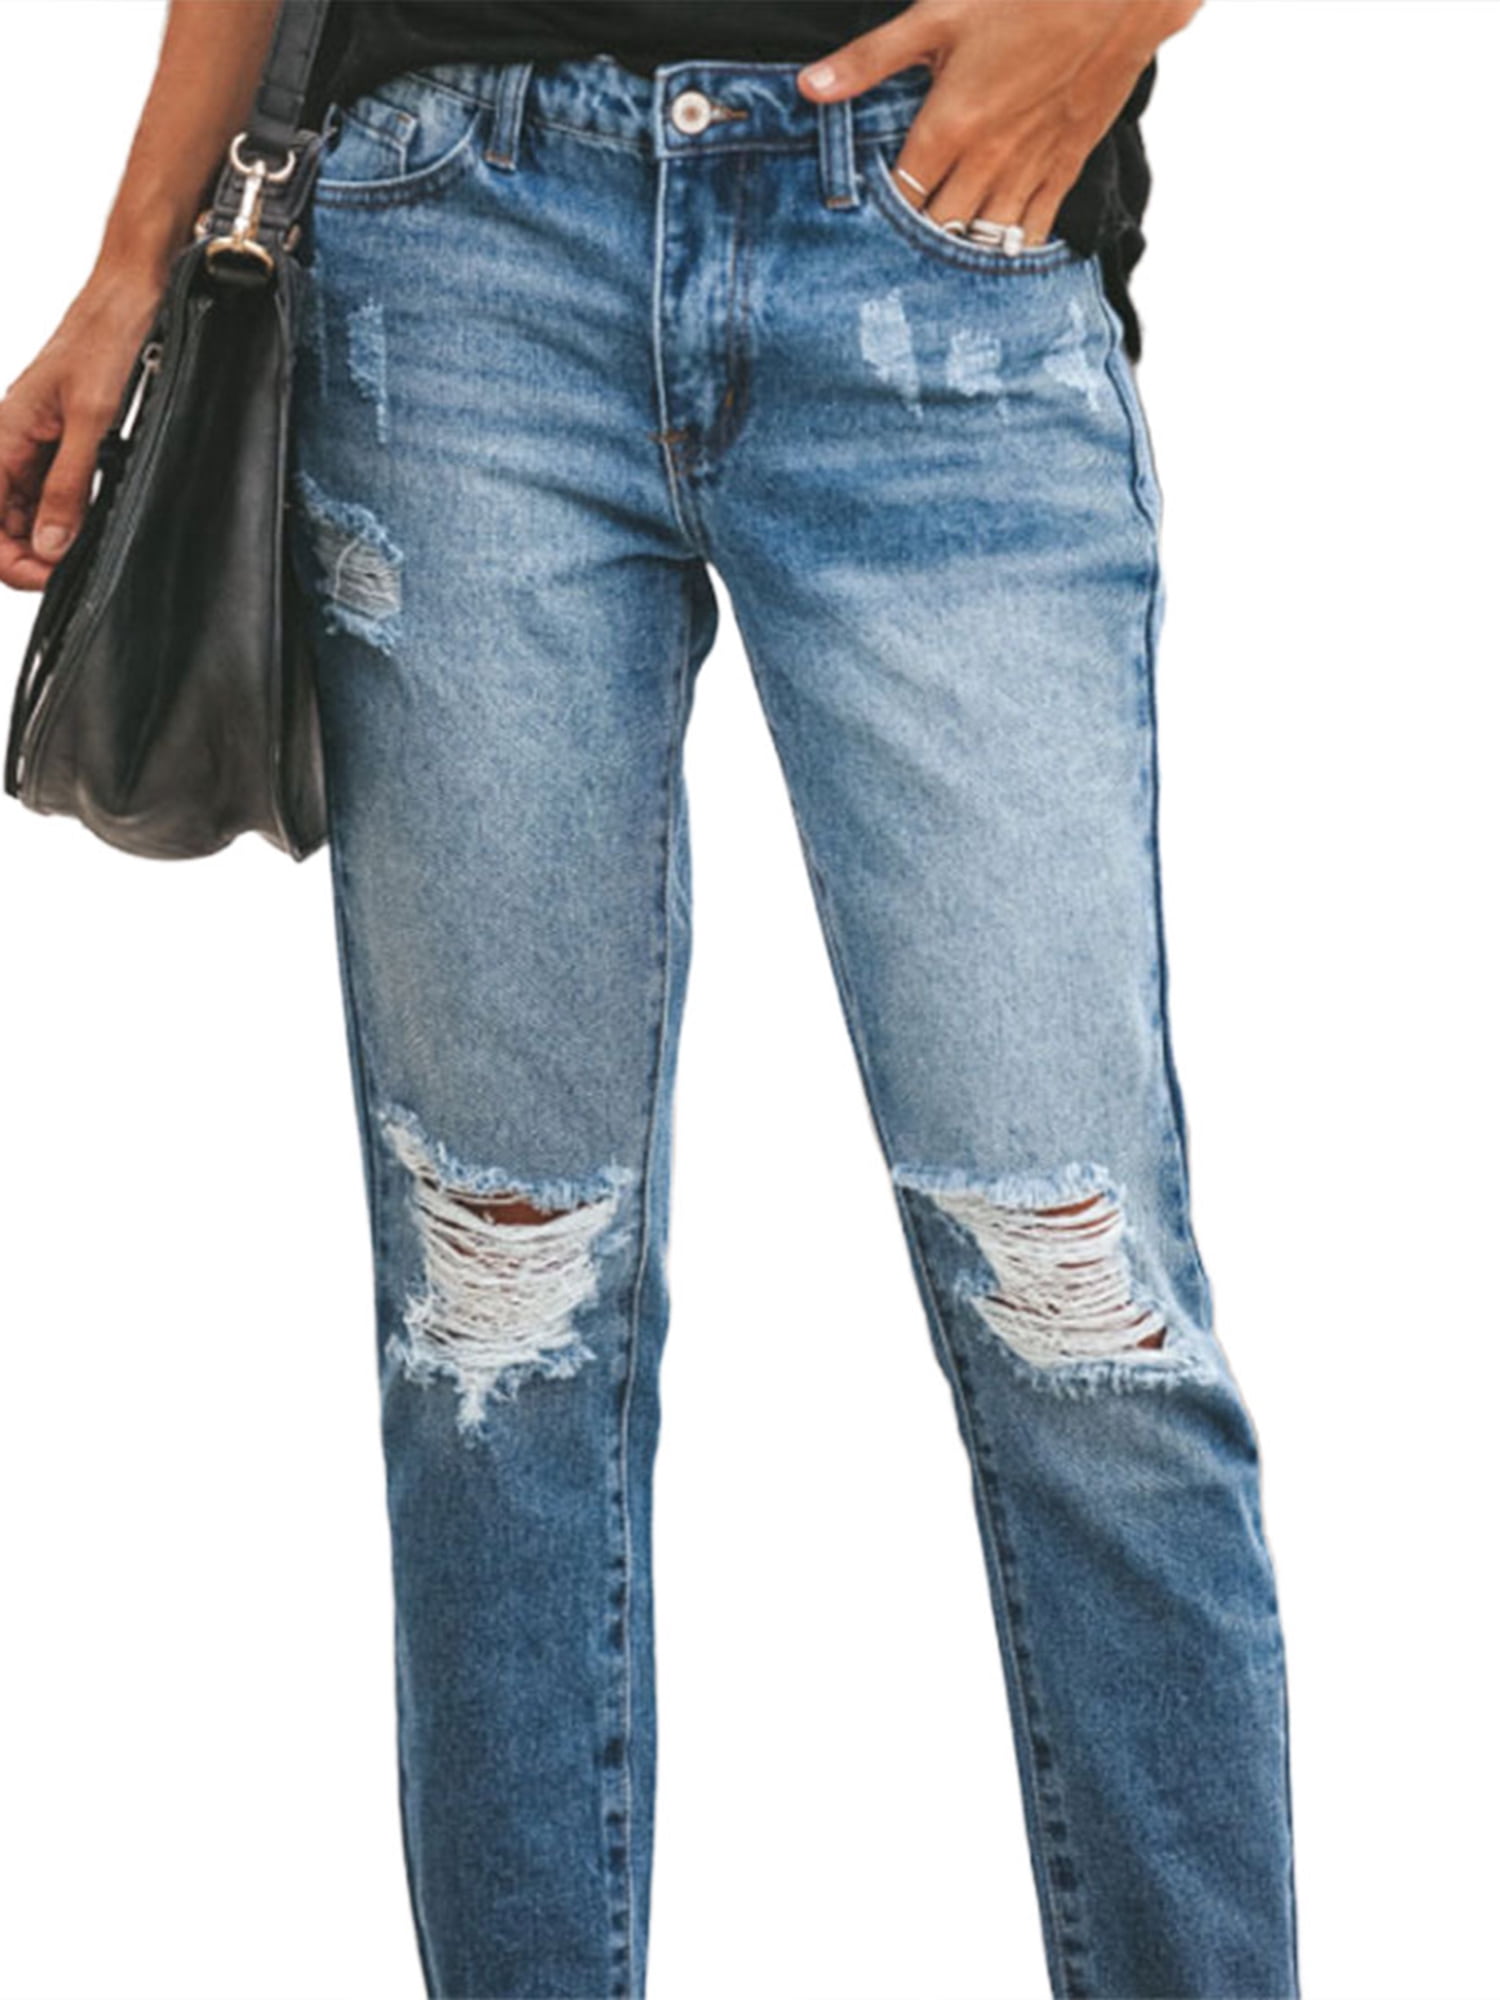 cute distressed jeans